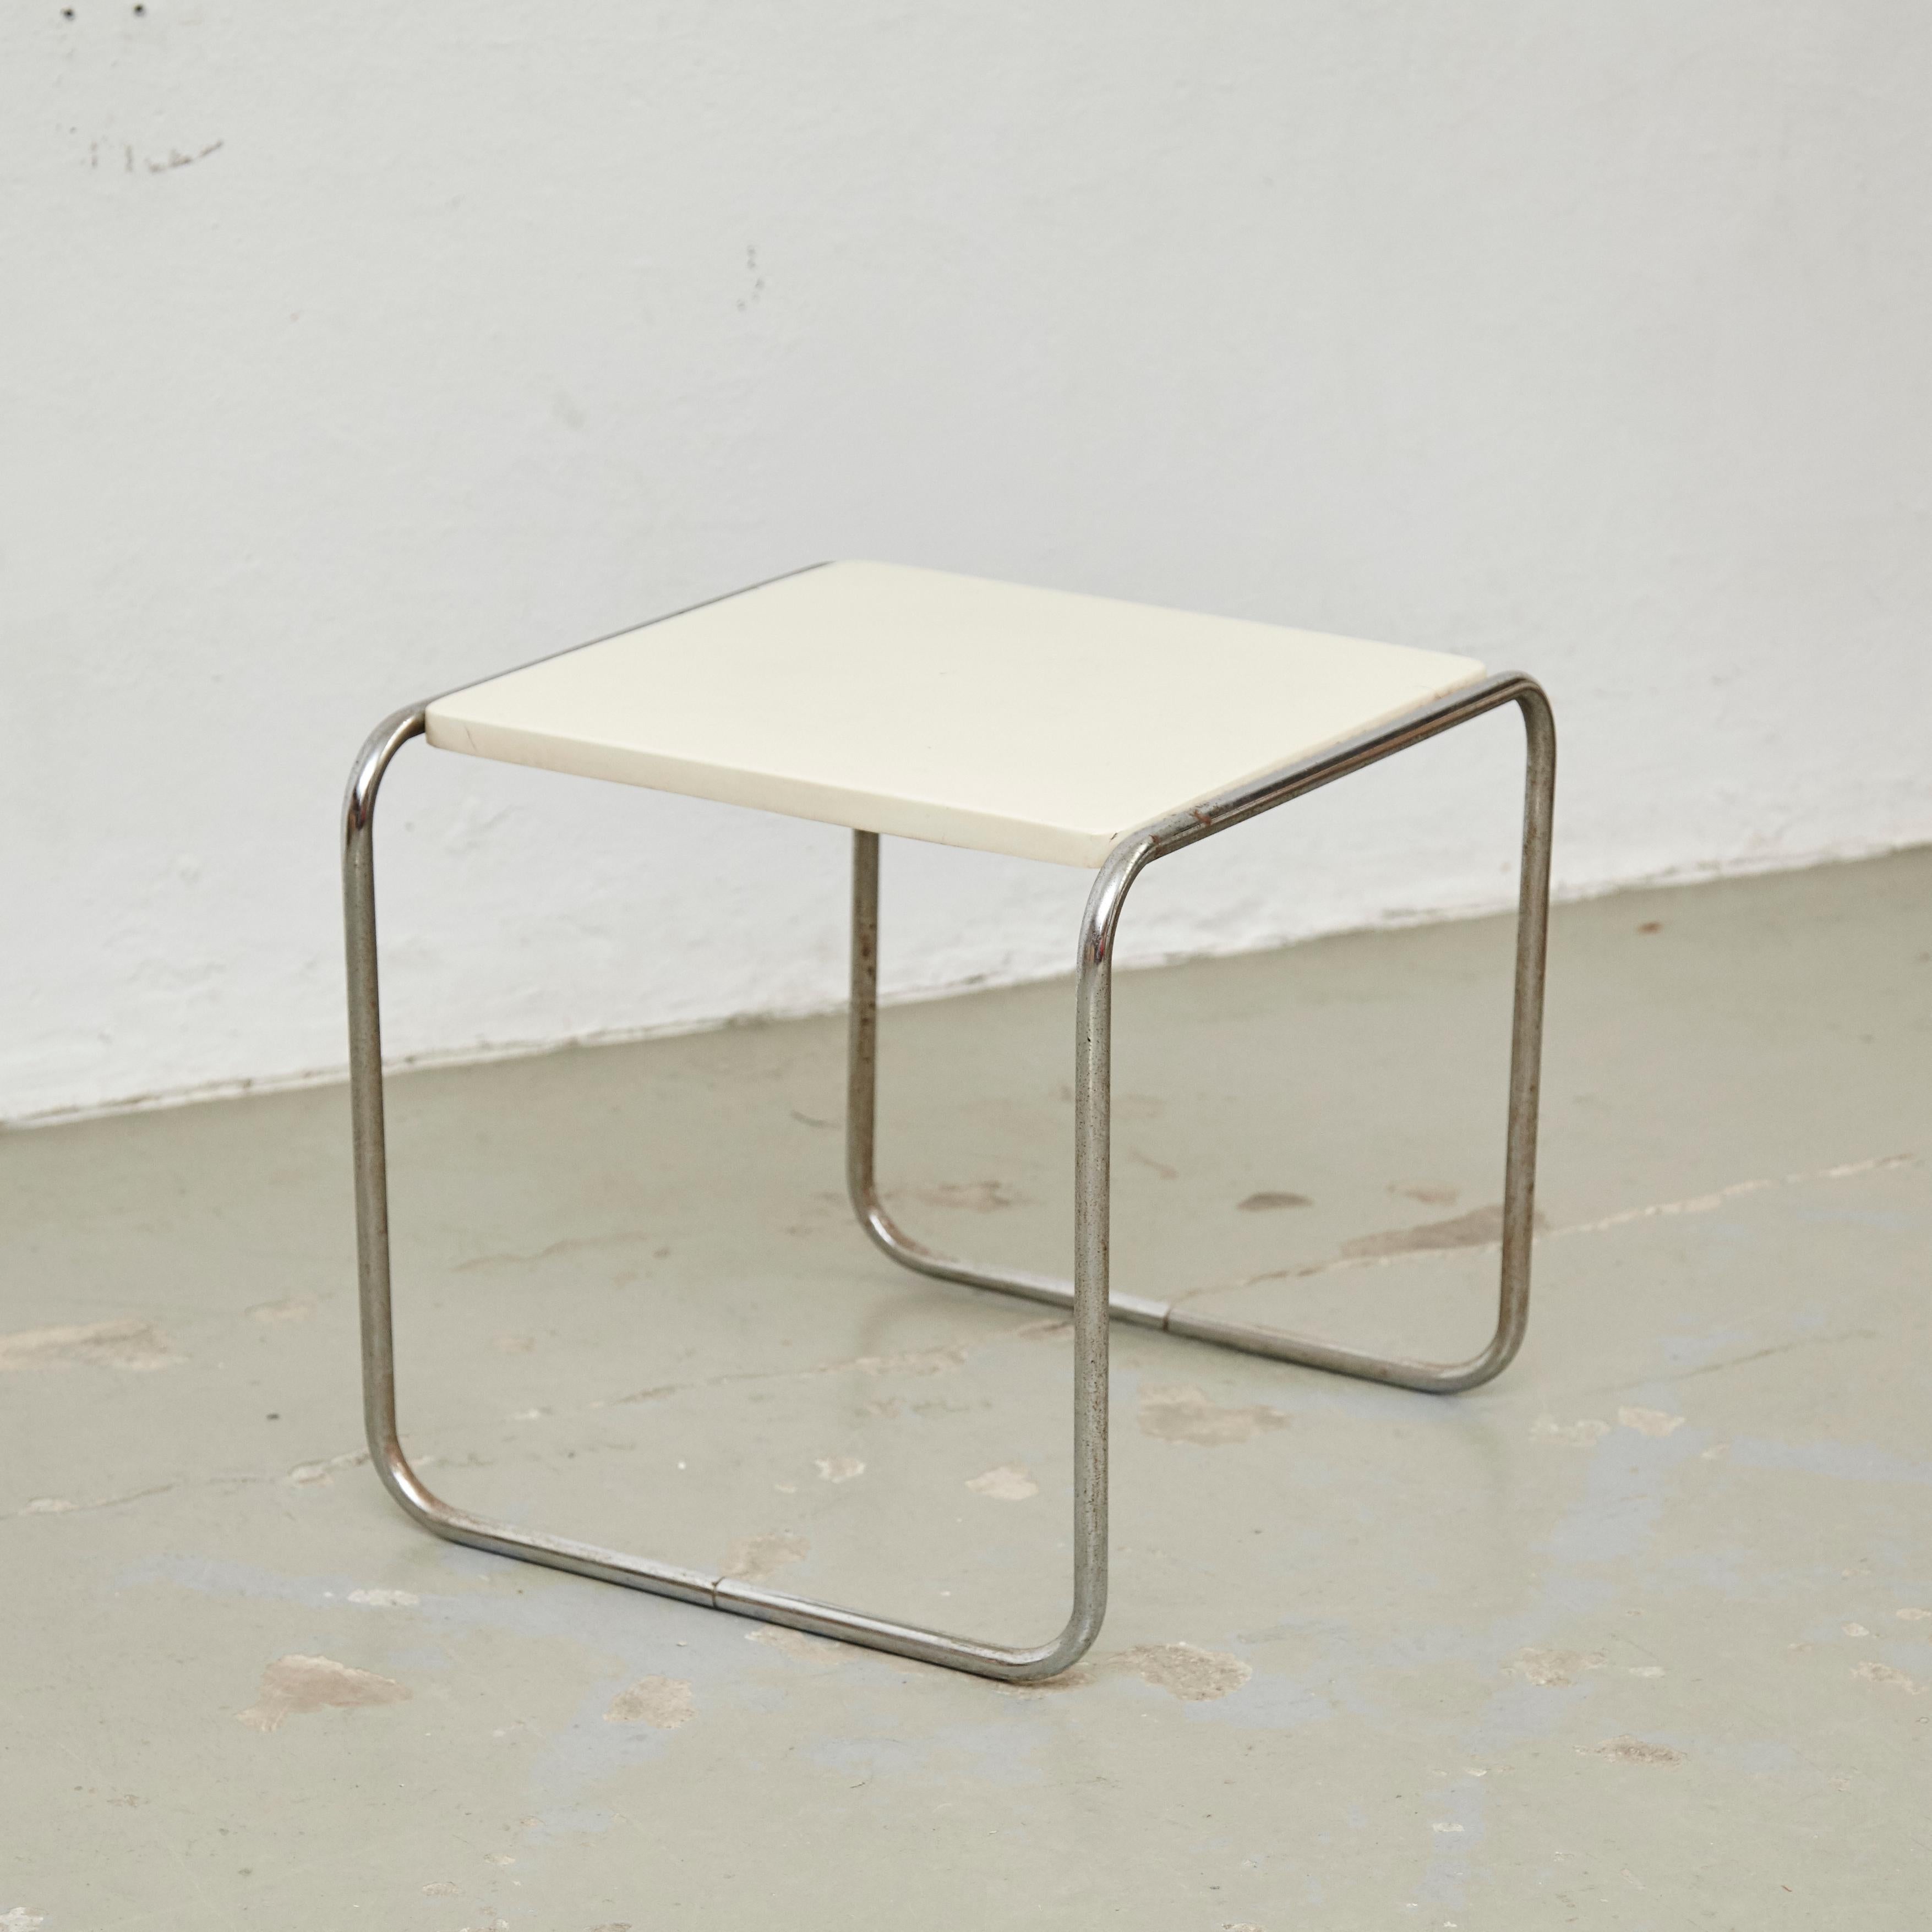 Table designed by Marcel Breuer in early 20th.
By unknown manufacturer, Germany, circa 1960.

In original condition, with minor wear consistent with age and use, preserving a beautiful patina.

Materials:
White Lacquered